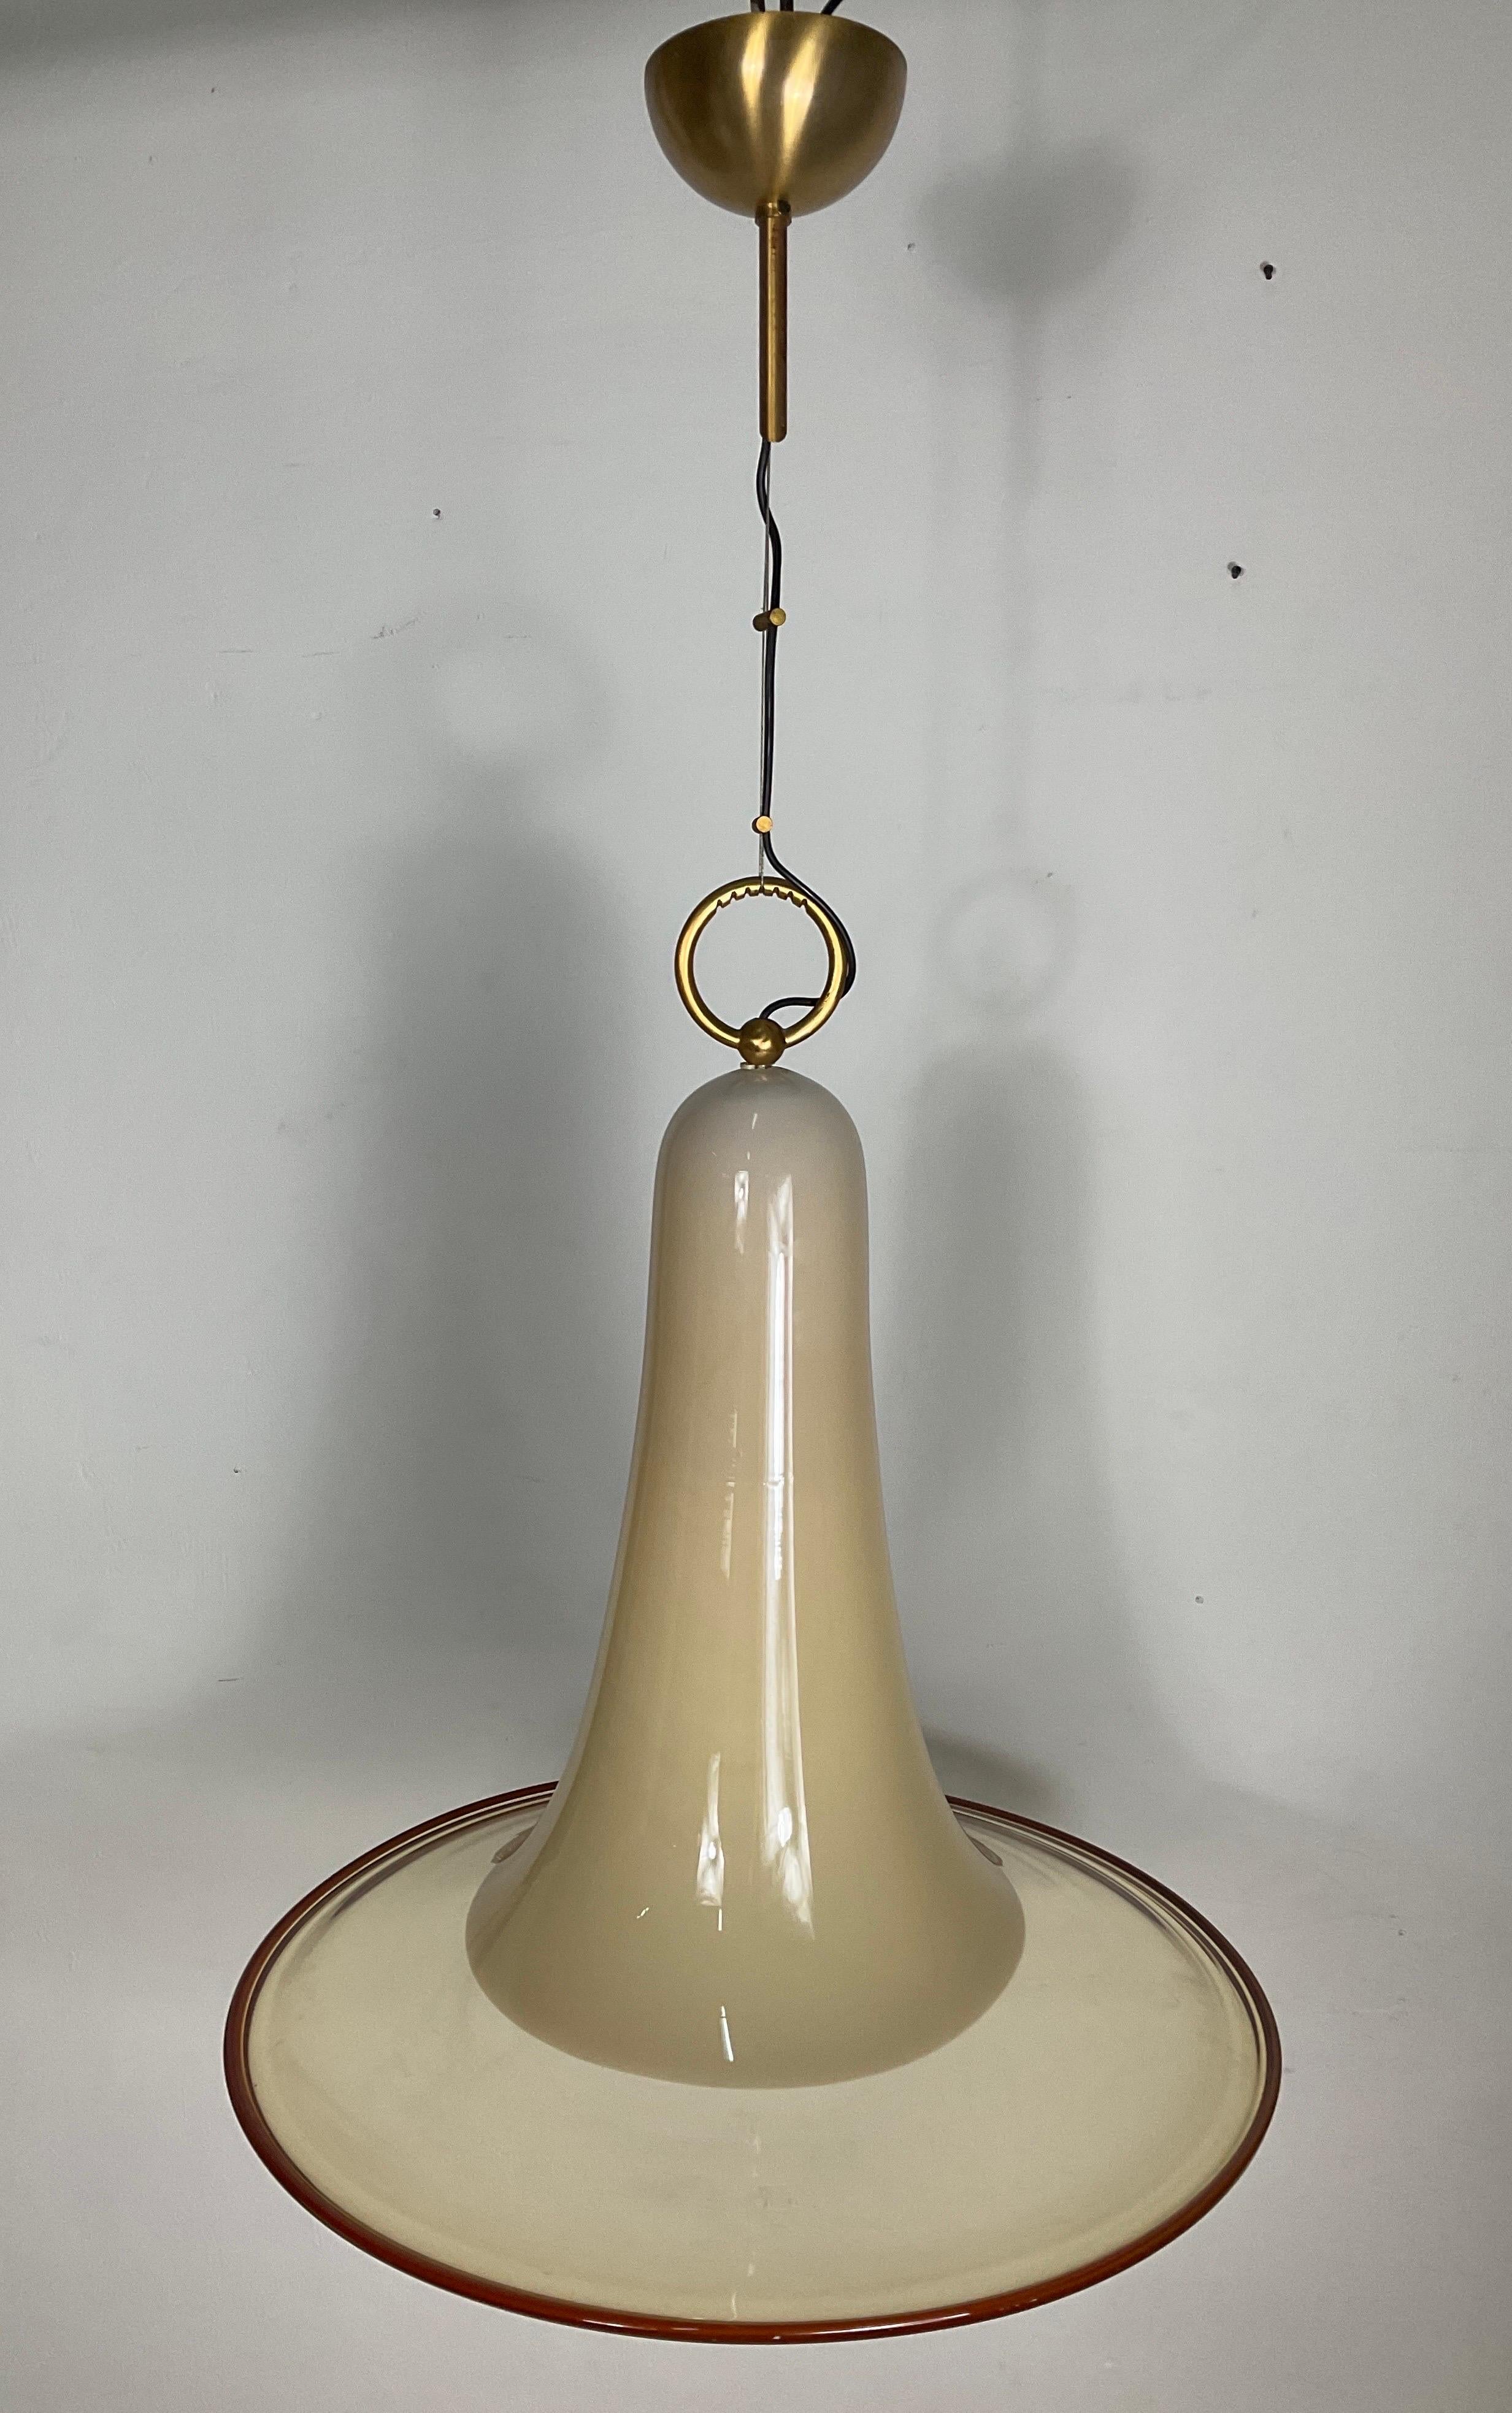 Outstanding Mid-Century Modern large pendant light fixture with stunning elongated bell formation. hand blown Murano glass in hues of parchment with amber glass rim. Features a stylized brass ring fitting with fabric coiled cord. Members of the